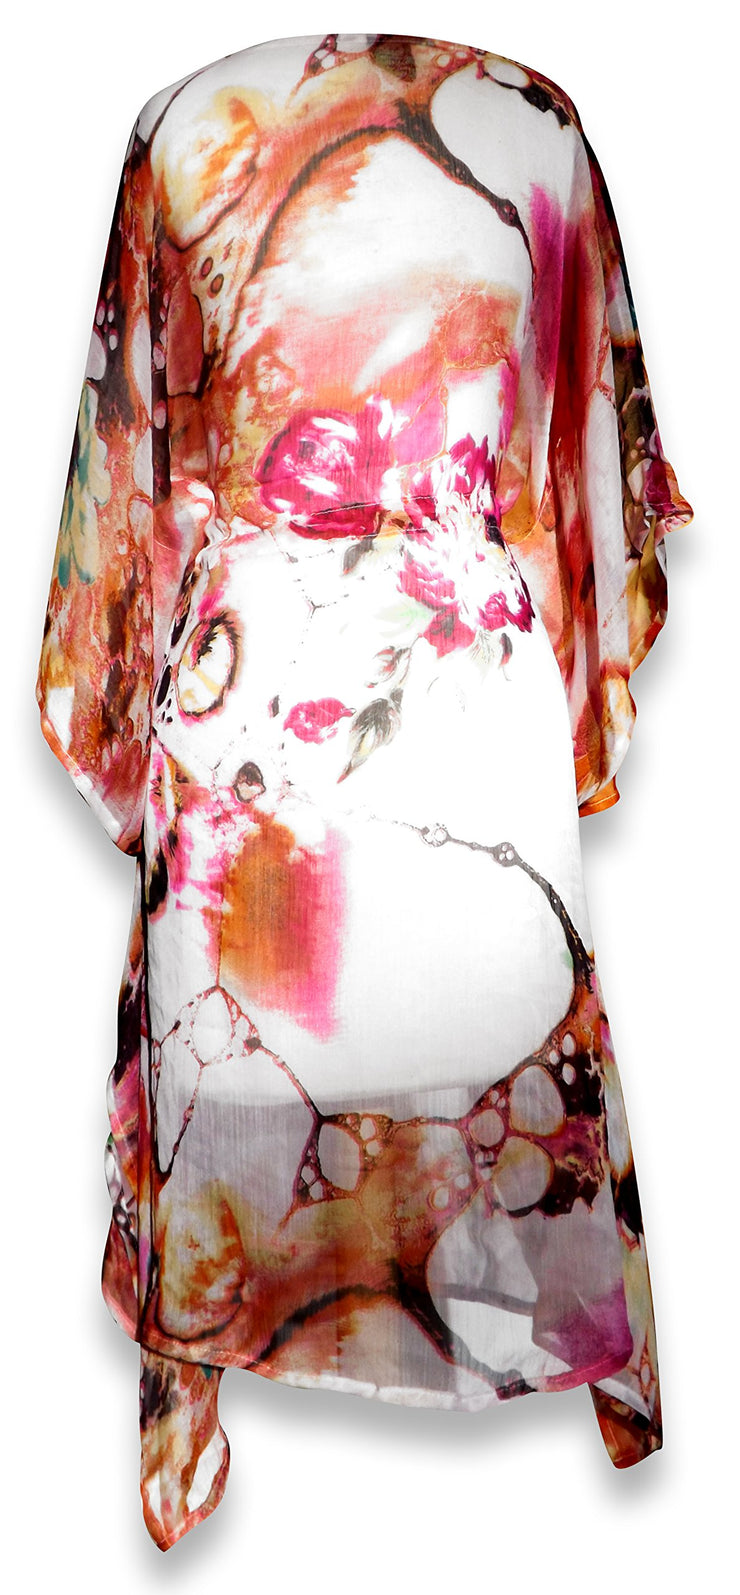 Peach Couture Bohemian Summer Tunic Beach Cover Up Dress with Embellished Neckline